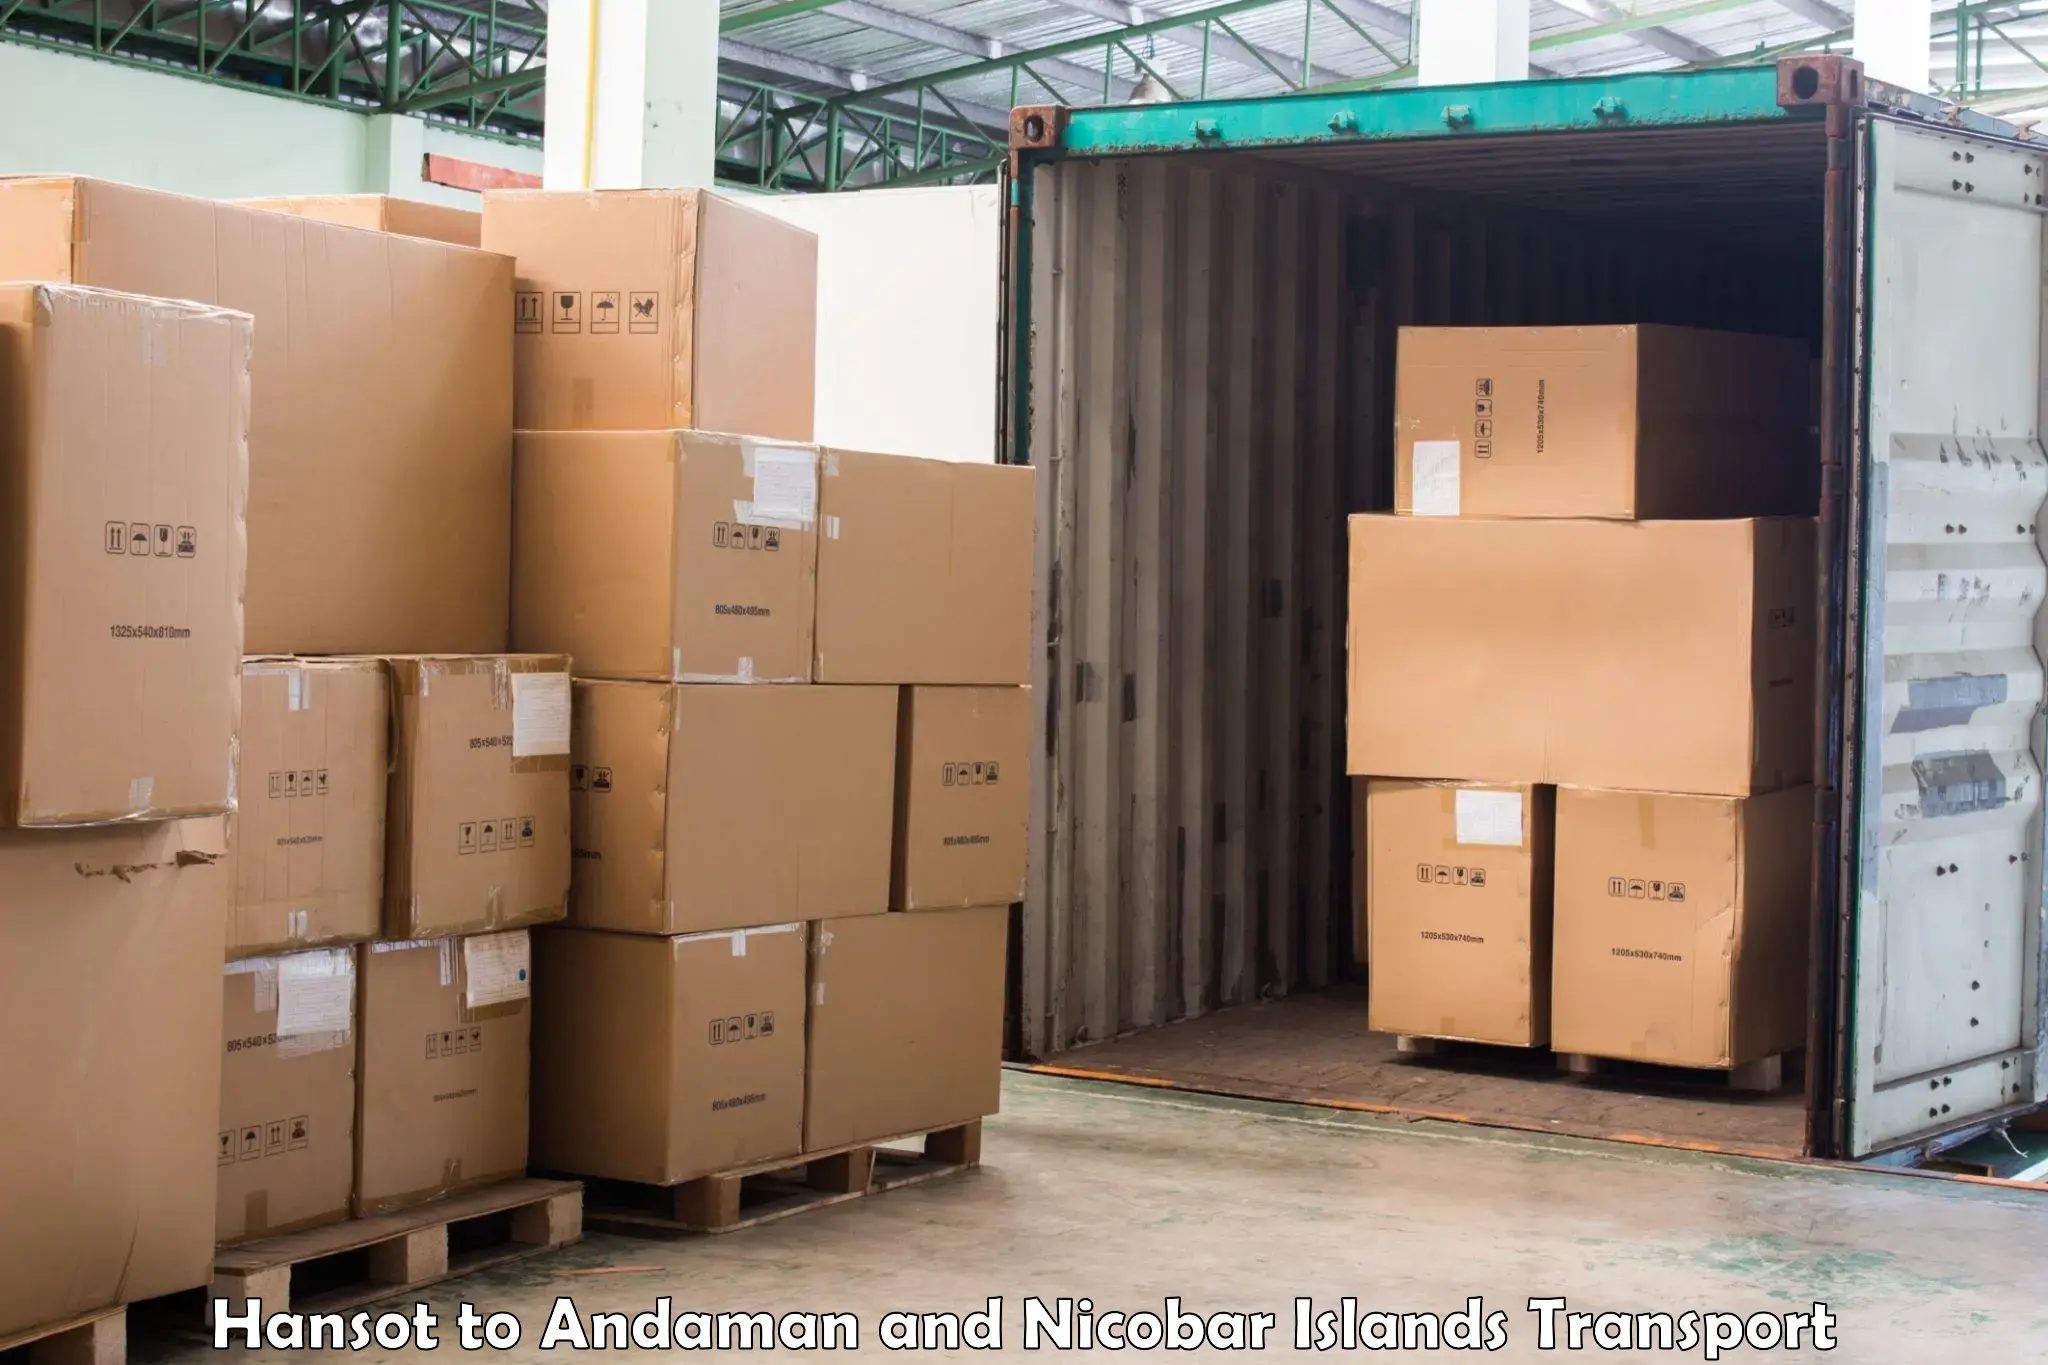 Container transport service in Hansot to Andaman and Nicobar Islands